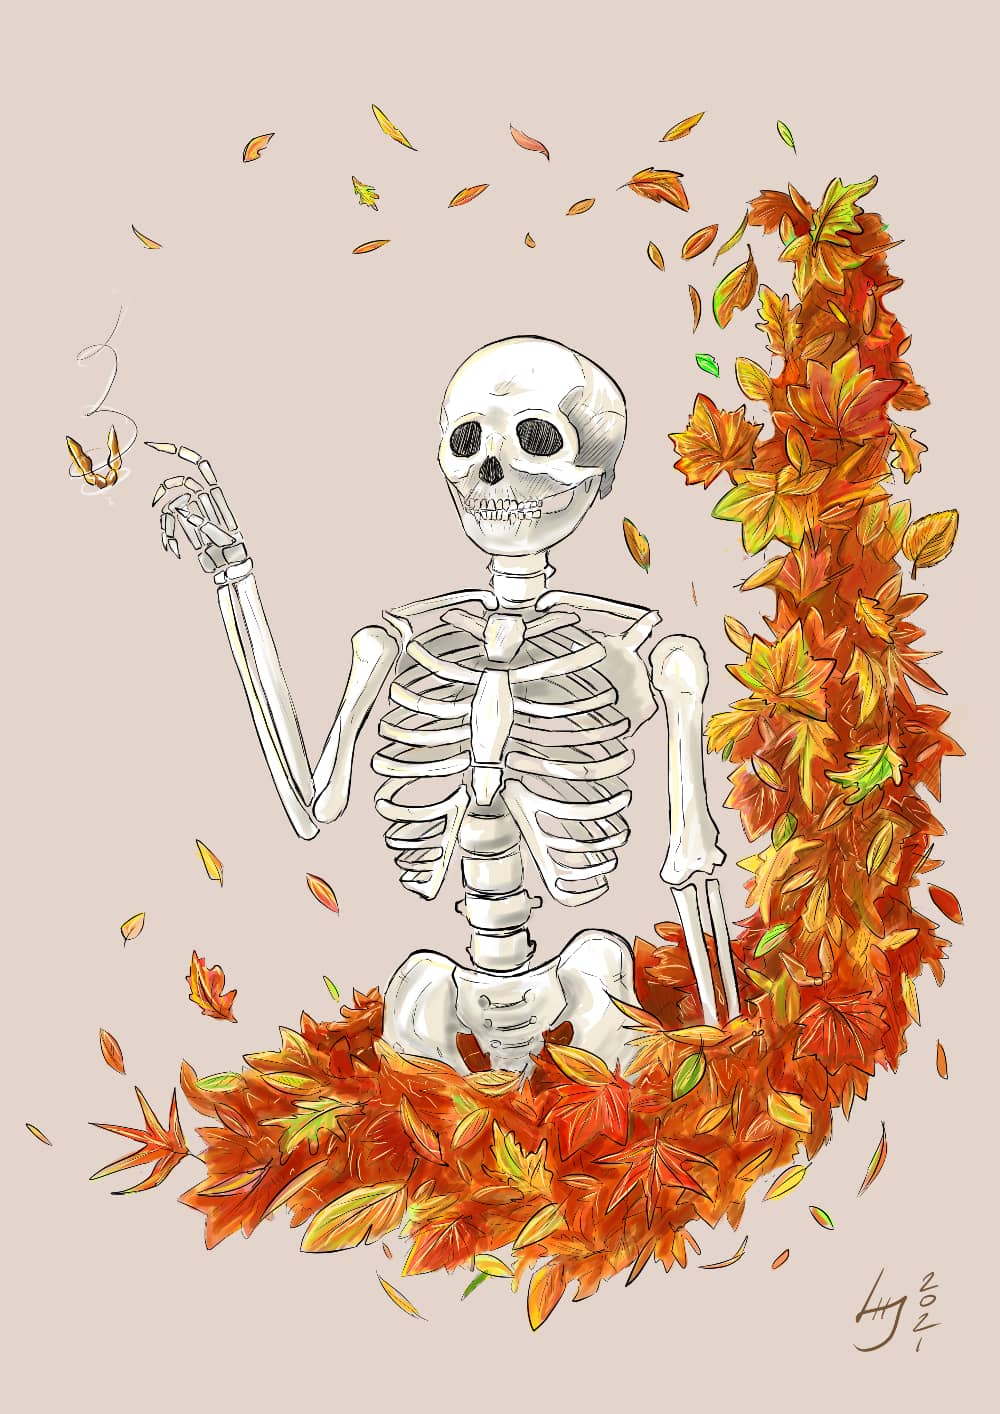 Illustration of a skeleton surrounded by autumn leaves